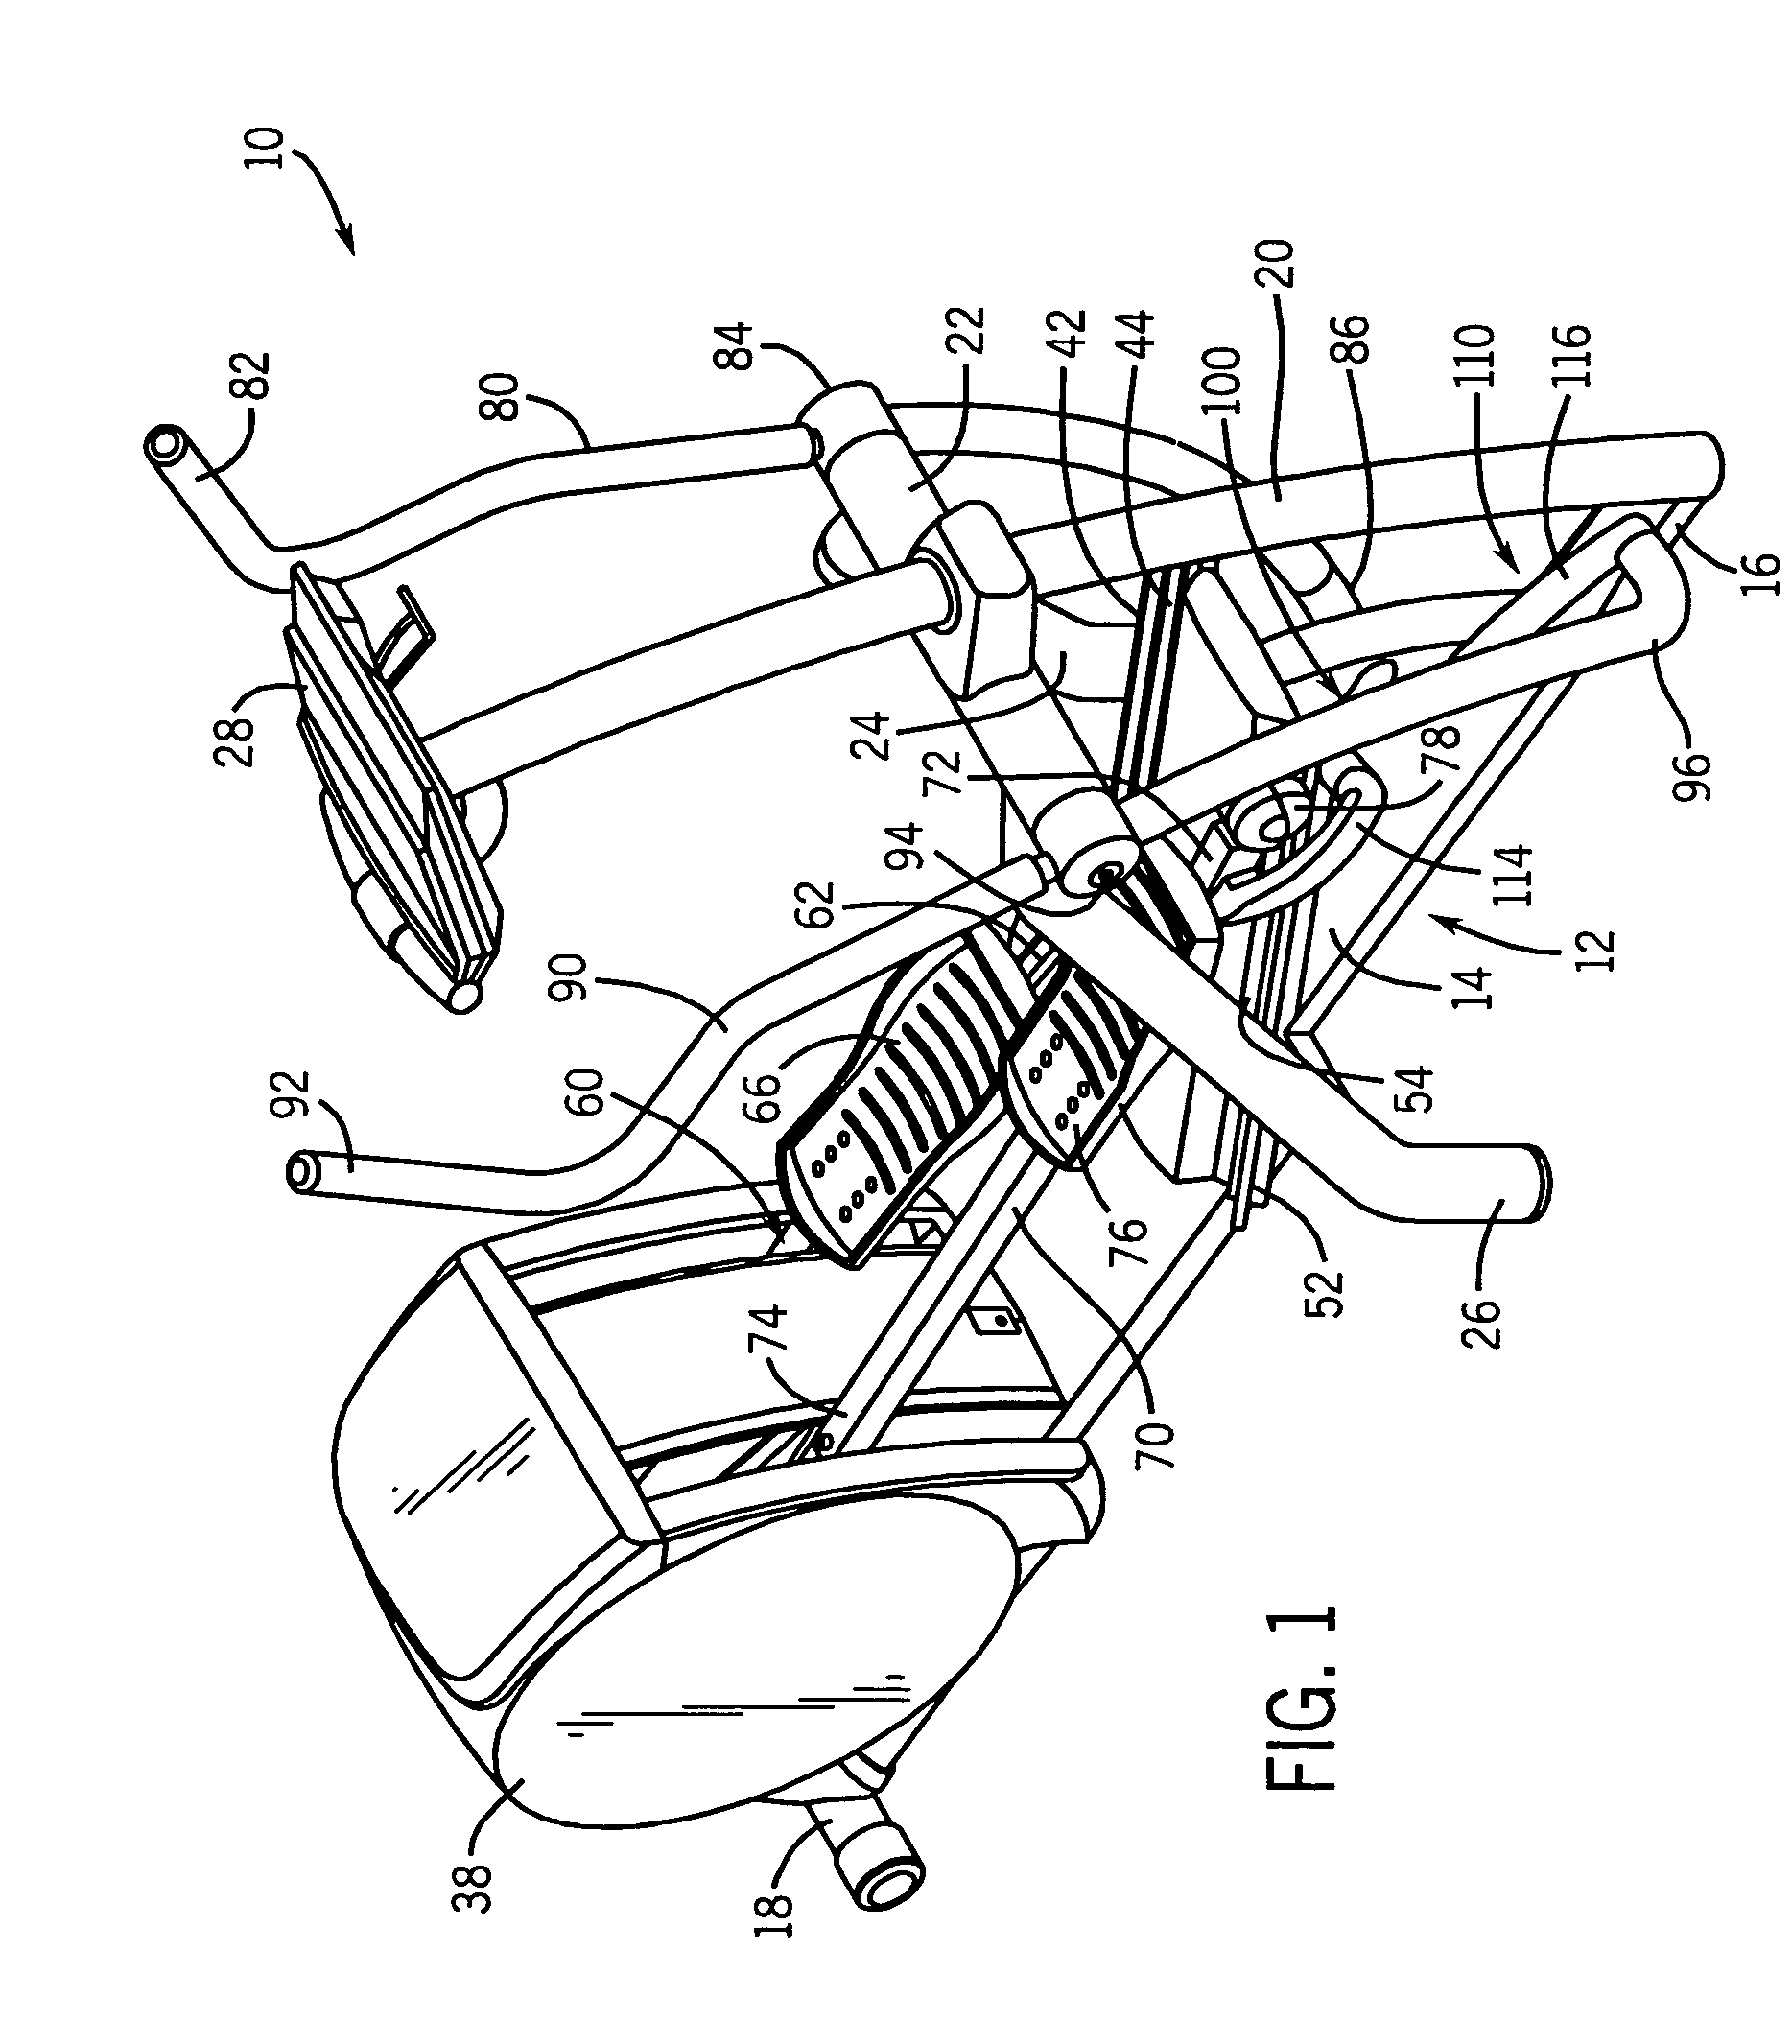 Elliptical exercise equipment with adjustable stride